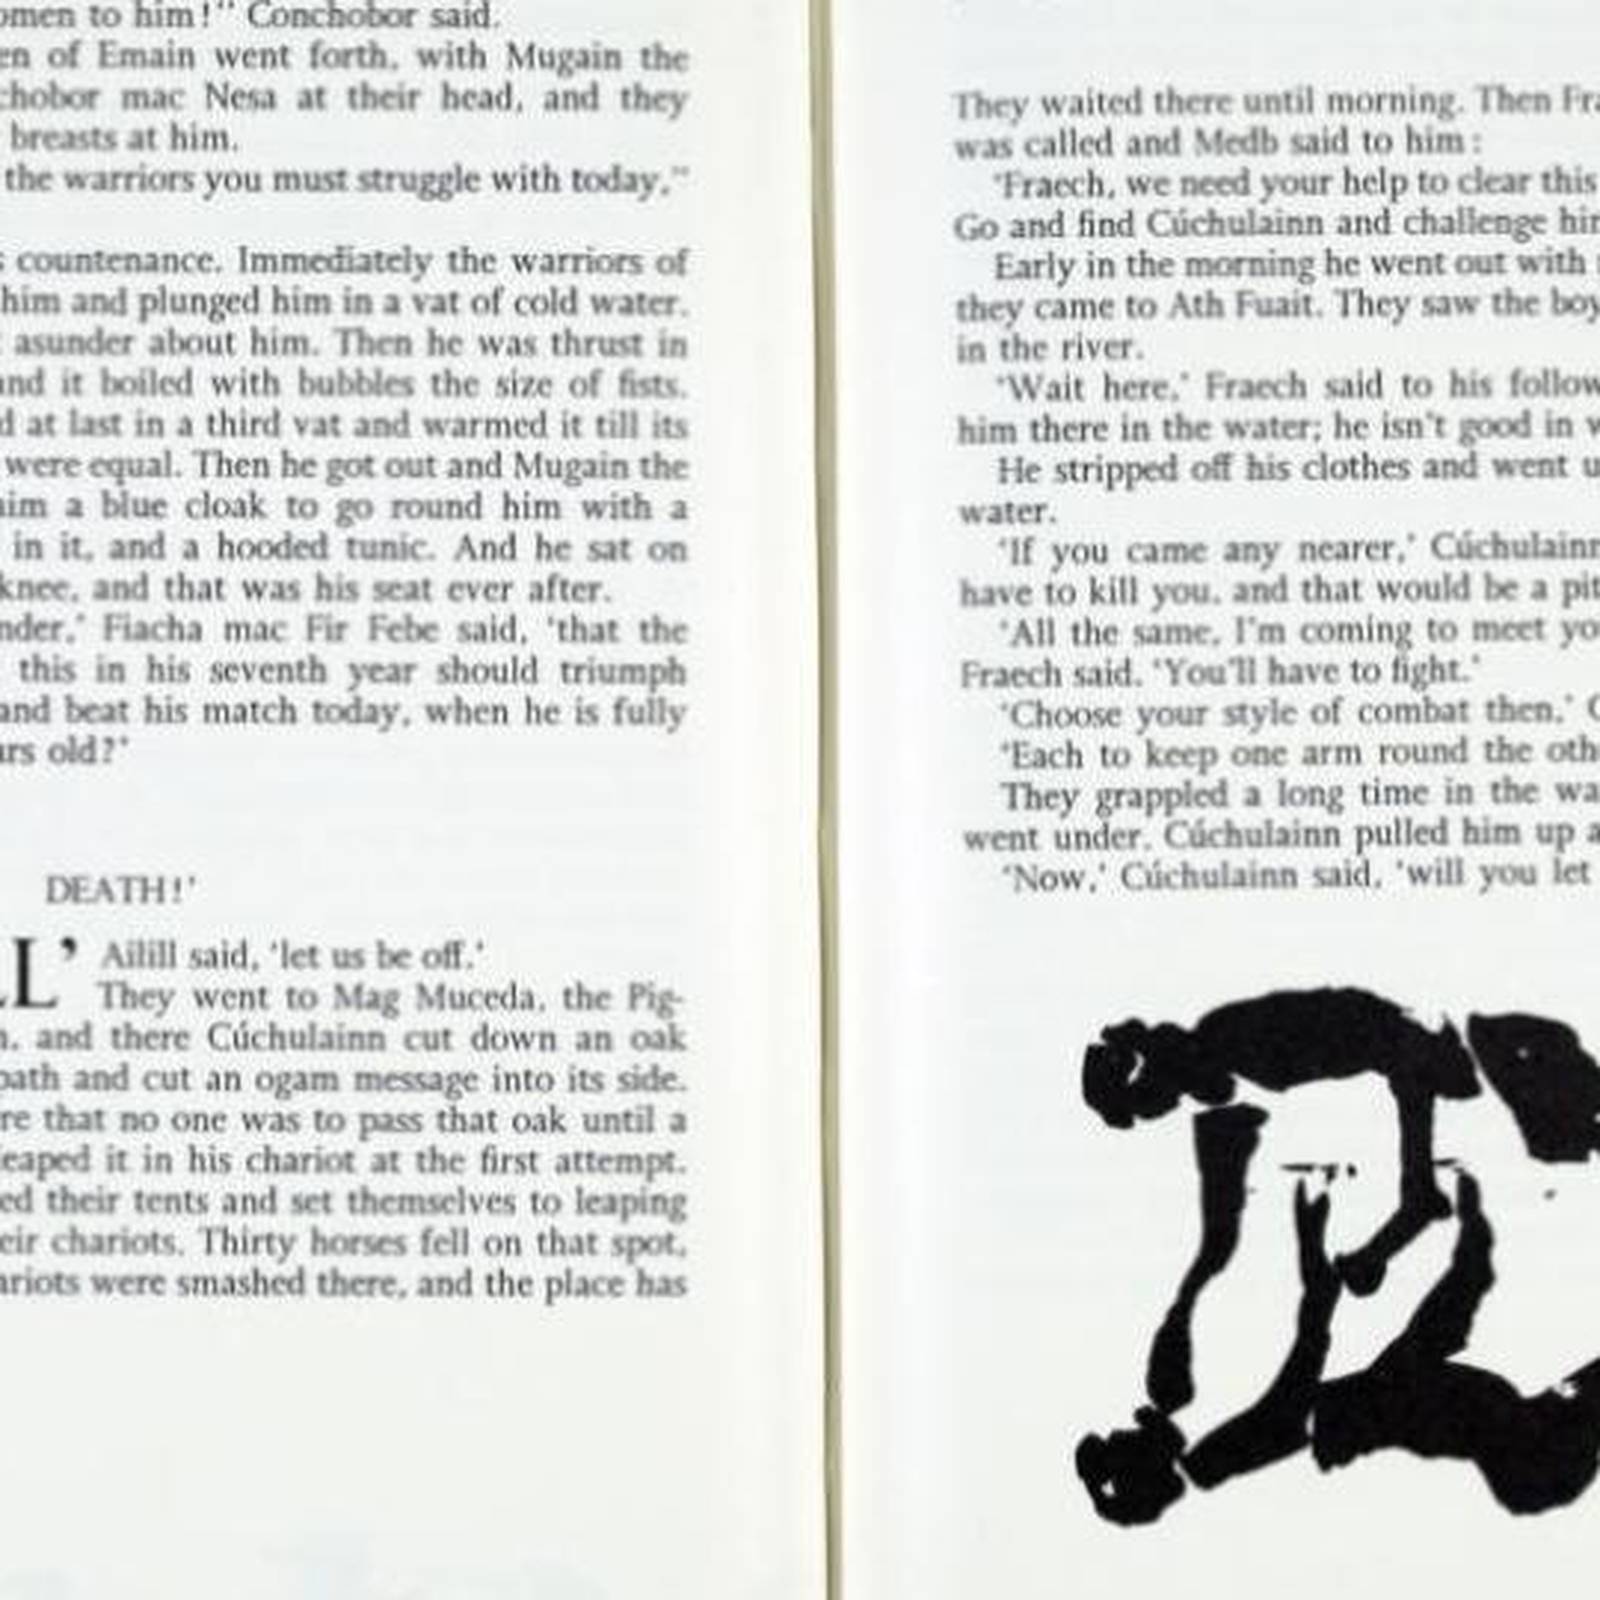 The Tain. Translated by Thomas Kinsella from the Irish. With Brush Drawings  by Louis Le Brocquy. Dublin: Dolmen Press, 1969. Limited Edition of Fifty  Copies (this copy number 31). Signed by Thomas